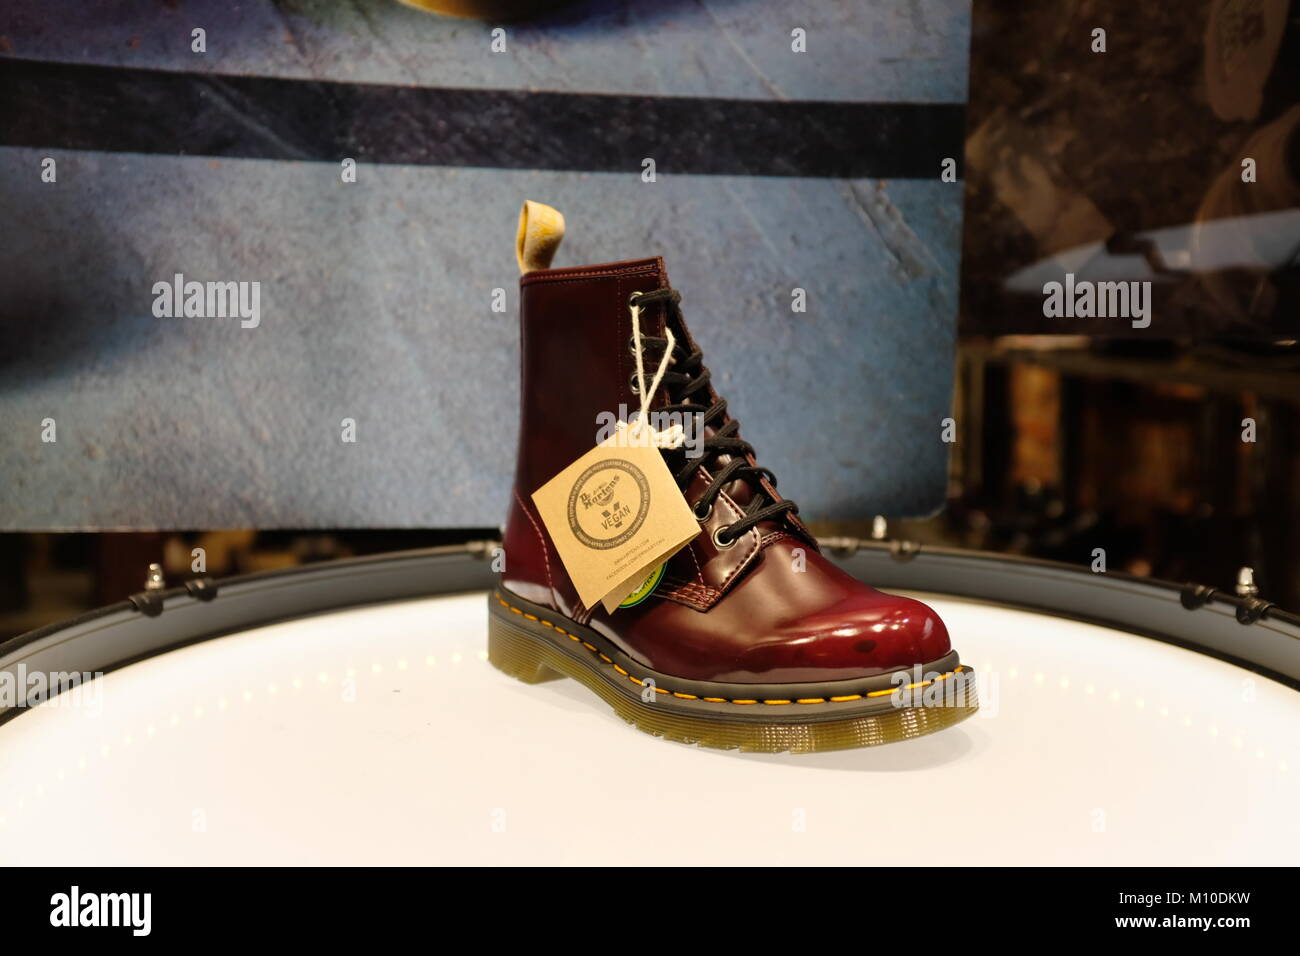 Dr Martens burgundy boot on display in shop window, Carnaby street, London, England, UK Stock Photo